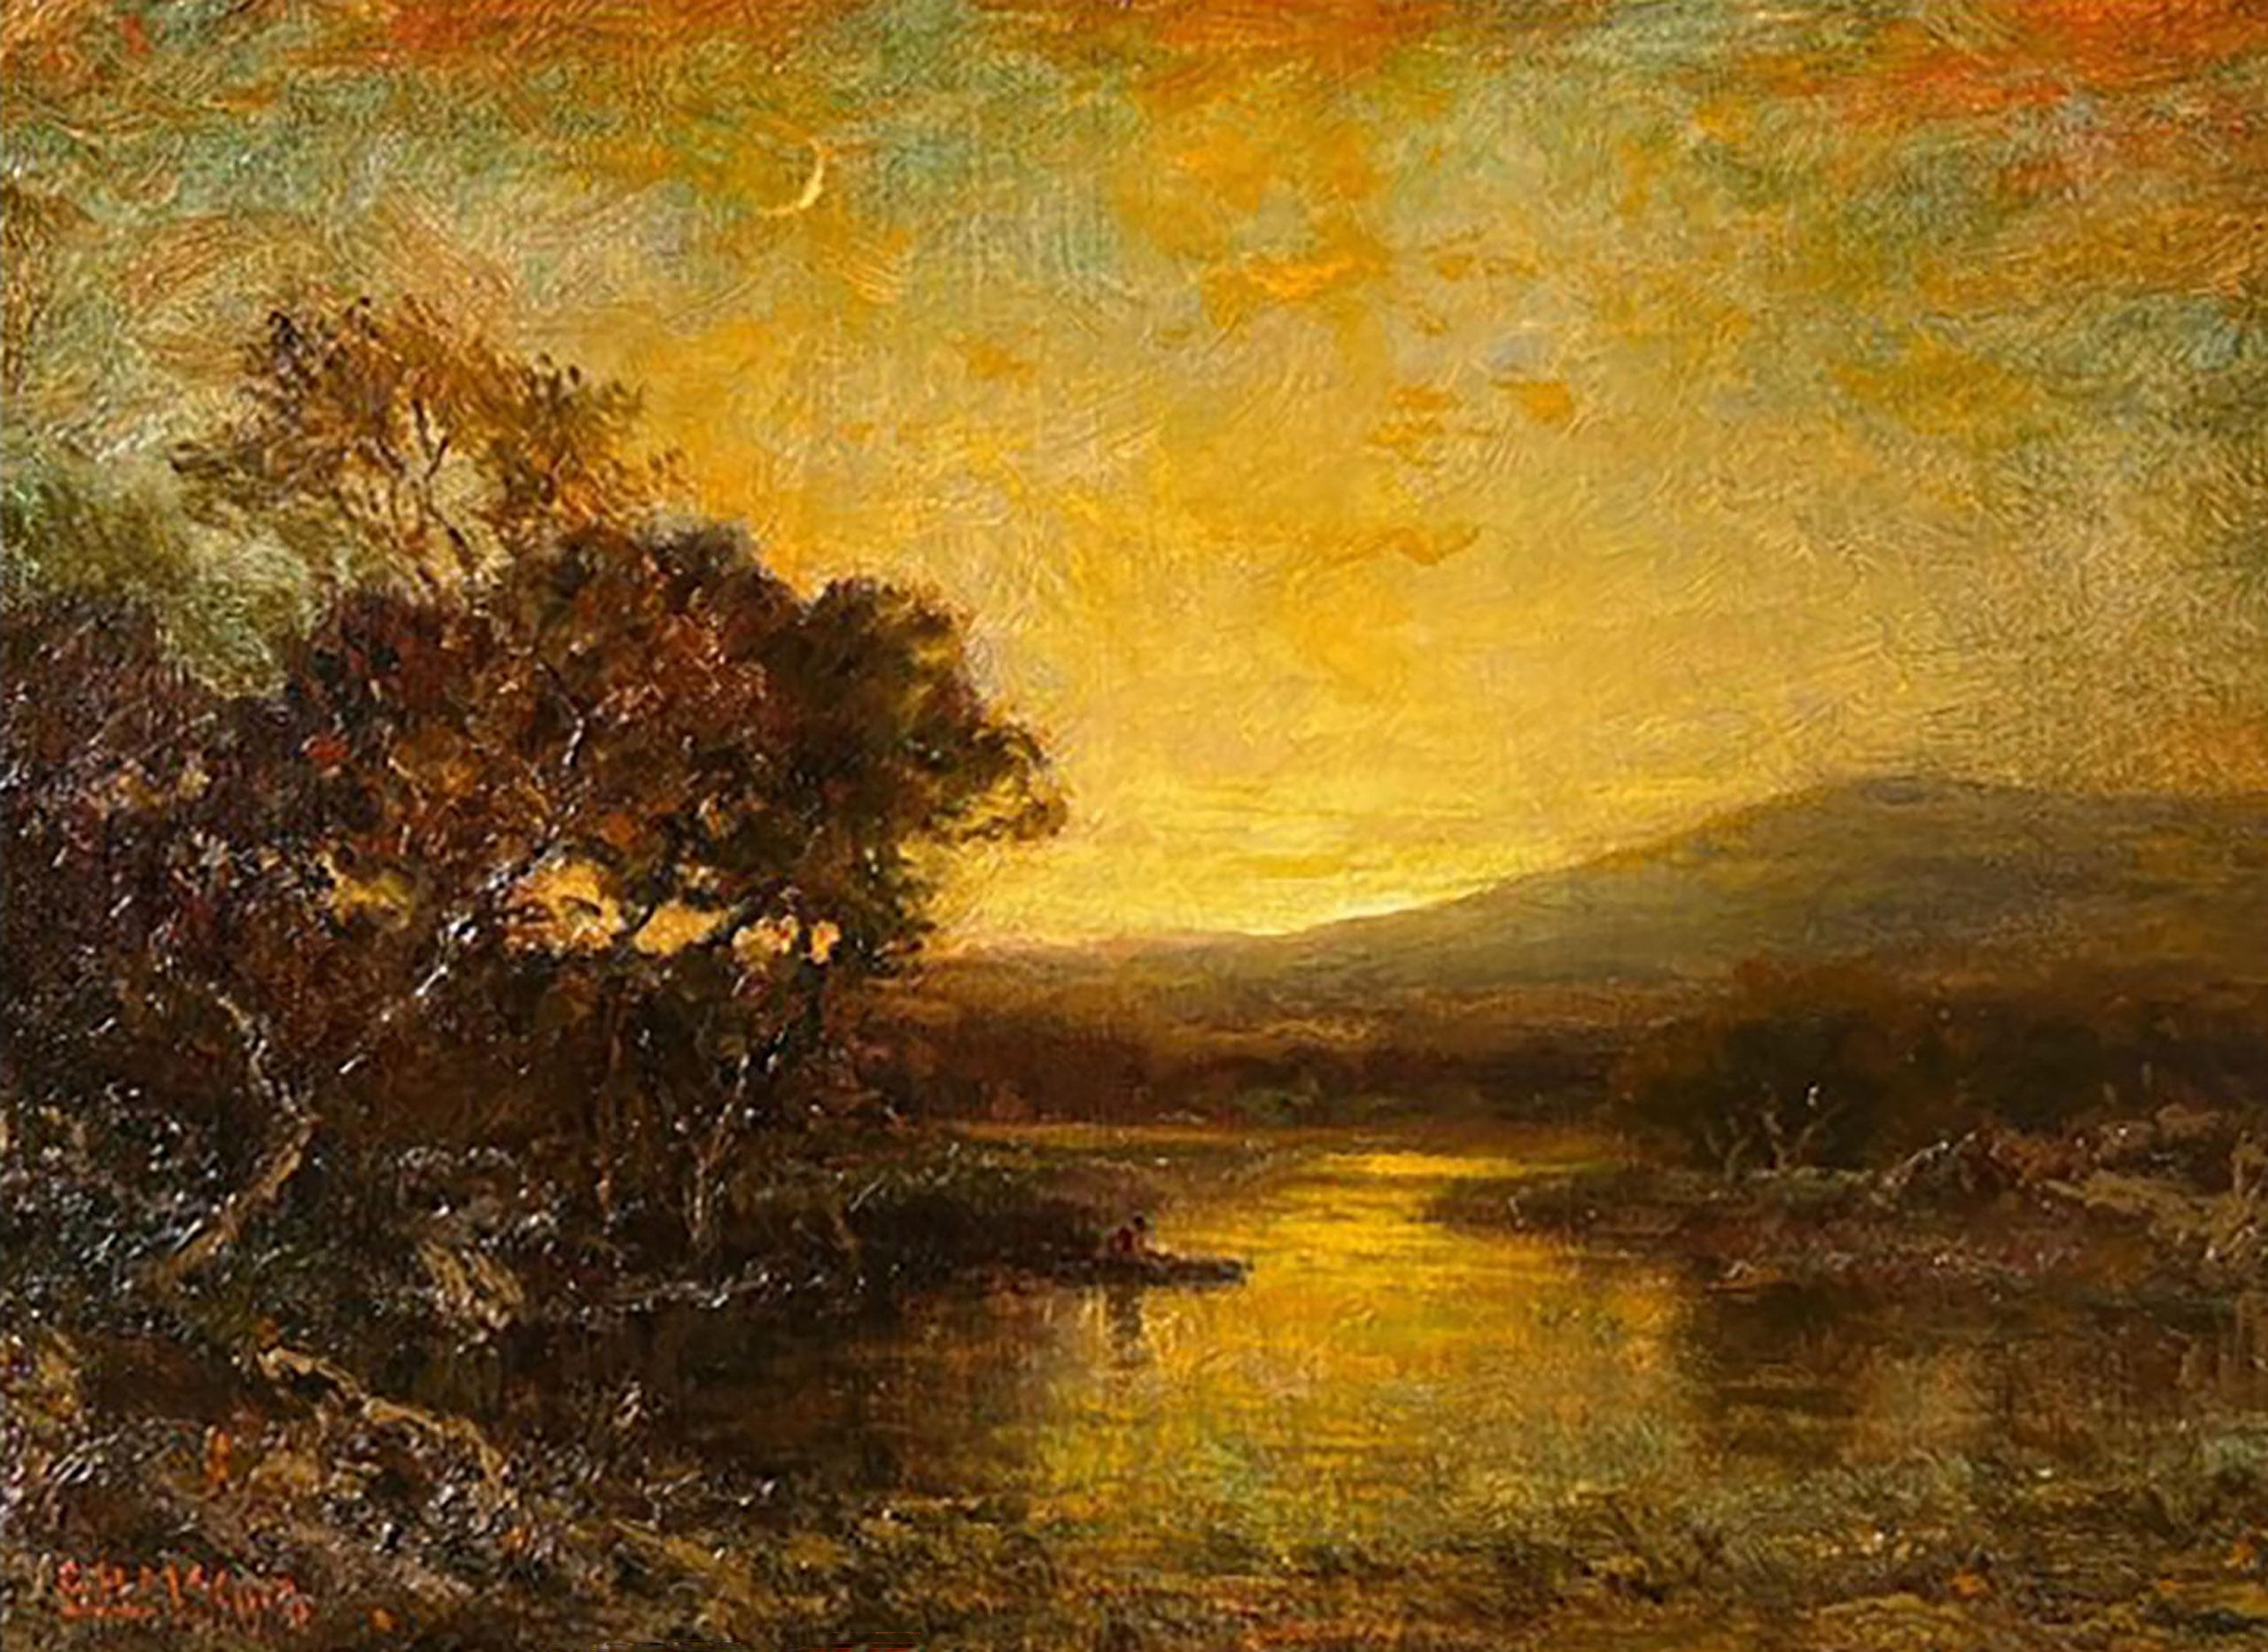 Boating at Sunset Tonalist Landscape by George Herbert McCord (1848-1909) 1